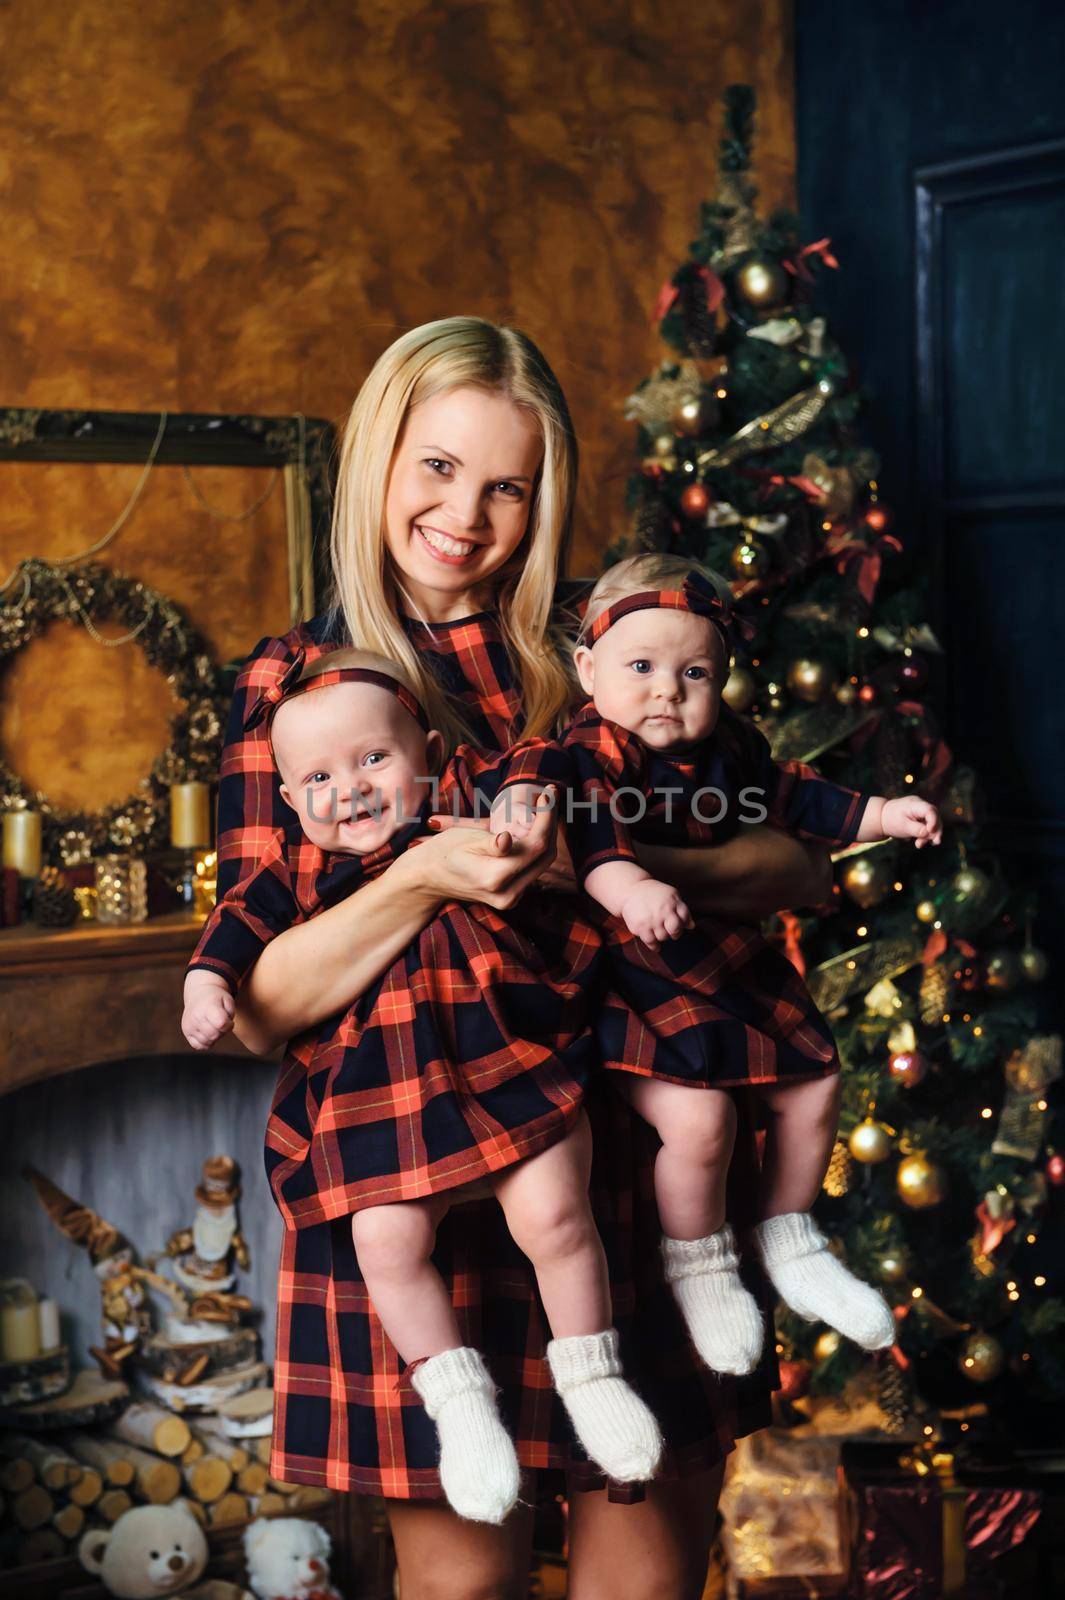 A happy mother with her twin children in the New Year's interior of the house on the background of a Christmas tree.